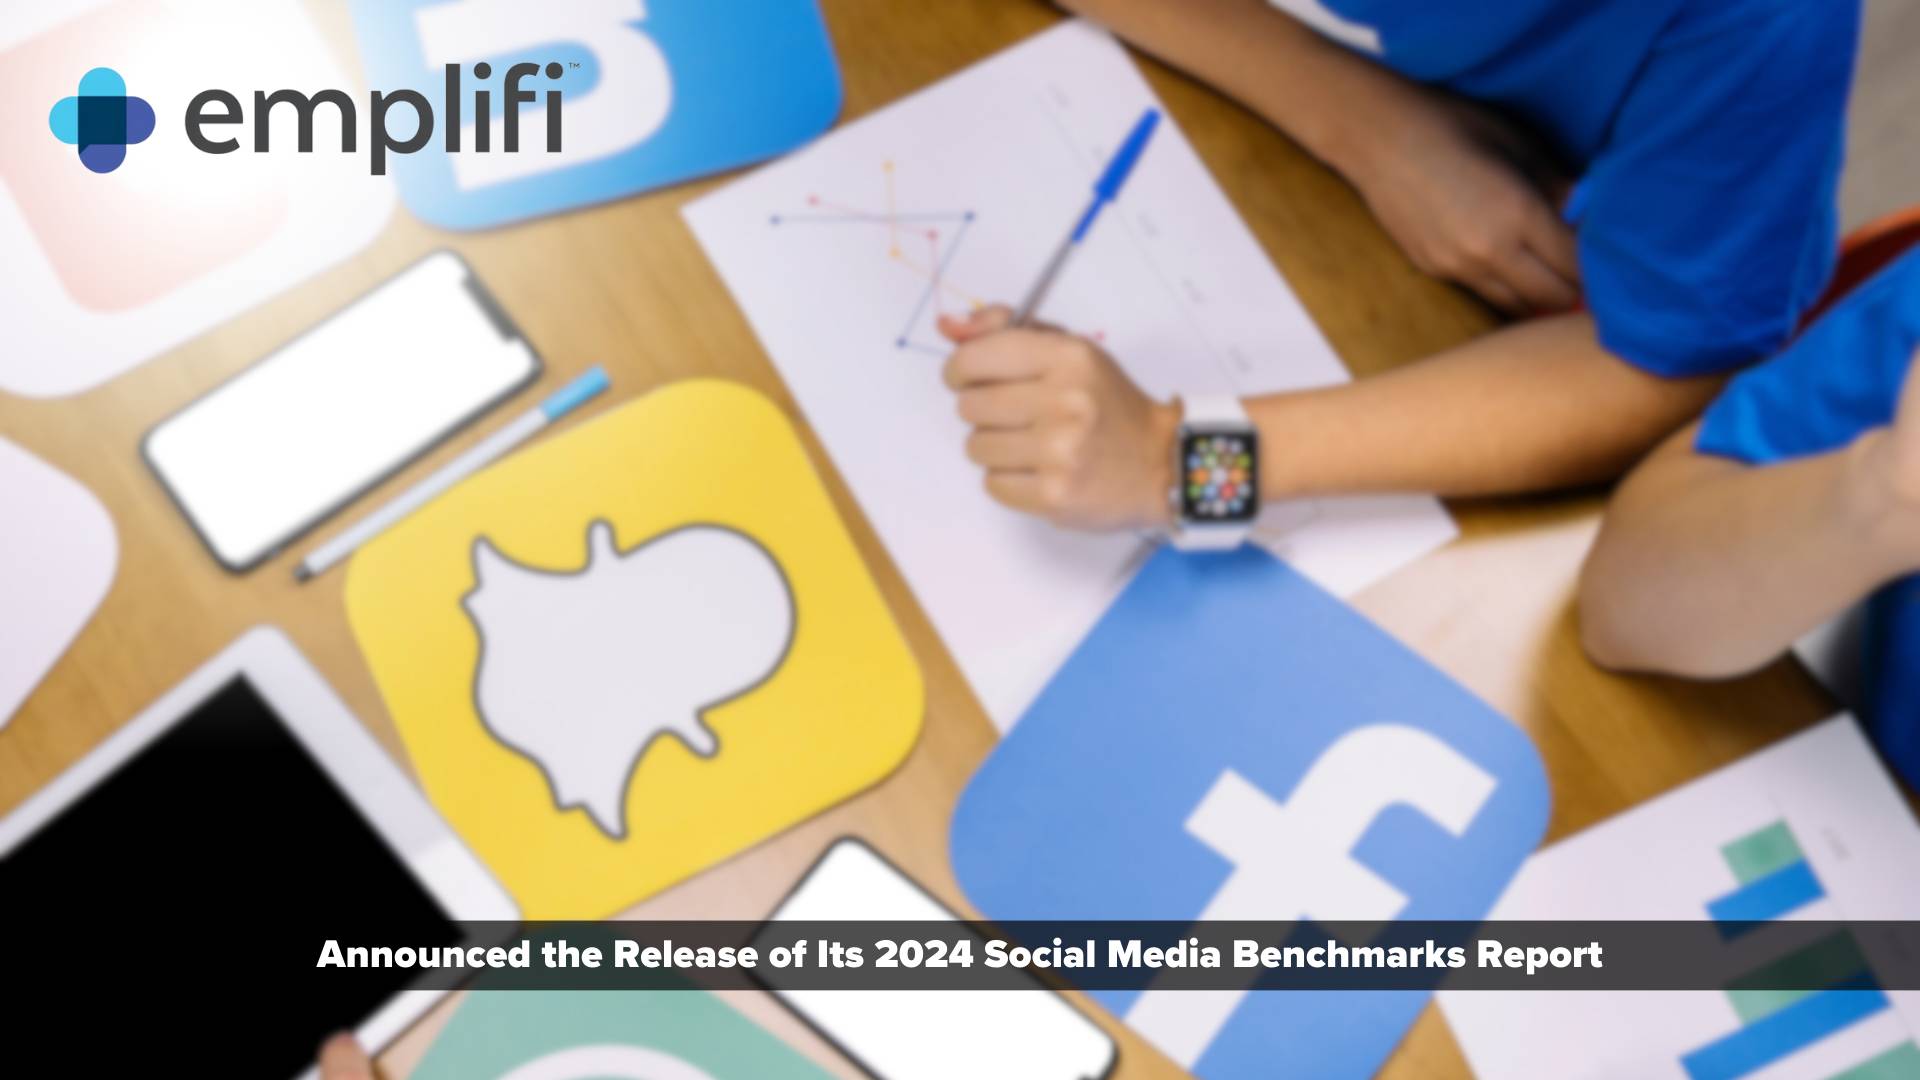 Emplifi Reveals Instagram and TikTok Generated Highest Level of Organic Interactions for Brands in Latest Social Media Benchmarks Report